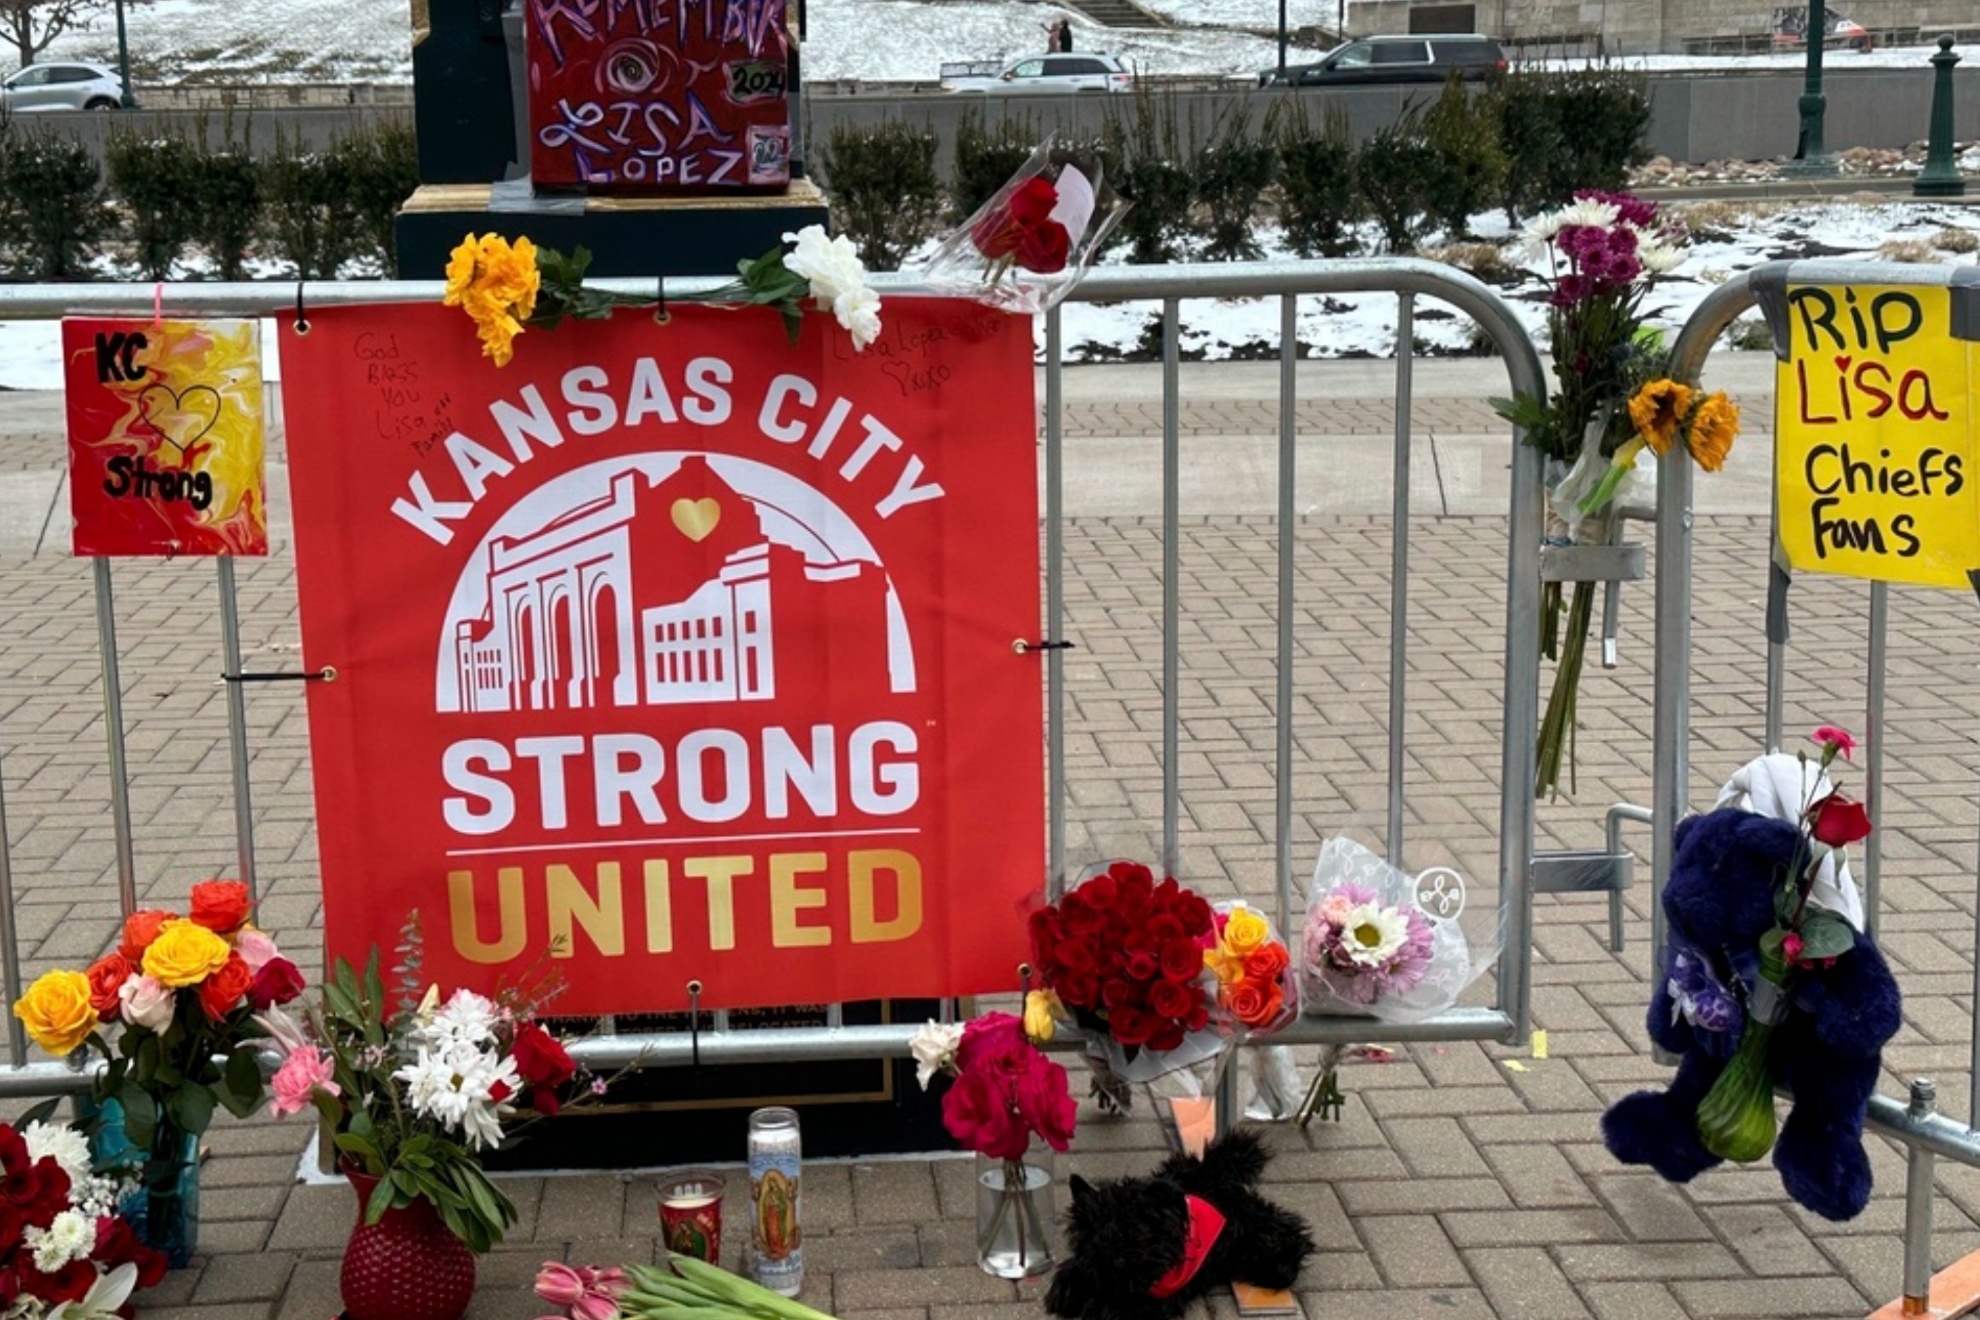 Two people have been charged with murder in the Super Bowl celebration shooting in Kansas City